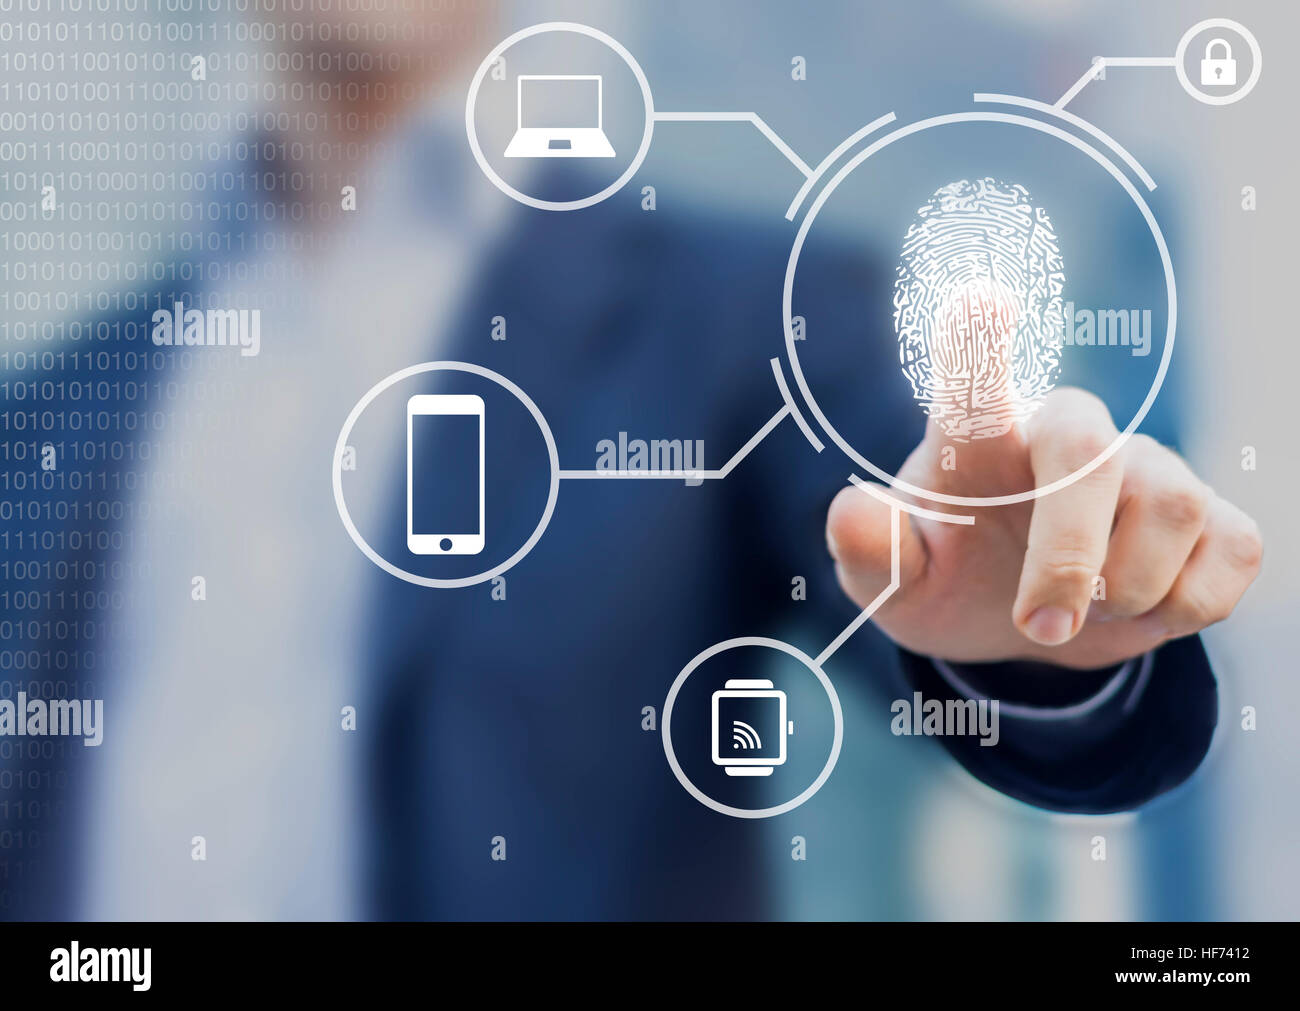 Person unlocking devices with fingerprint scan using biometrics security, concept with digital interface Stock Photo